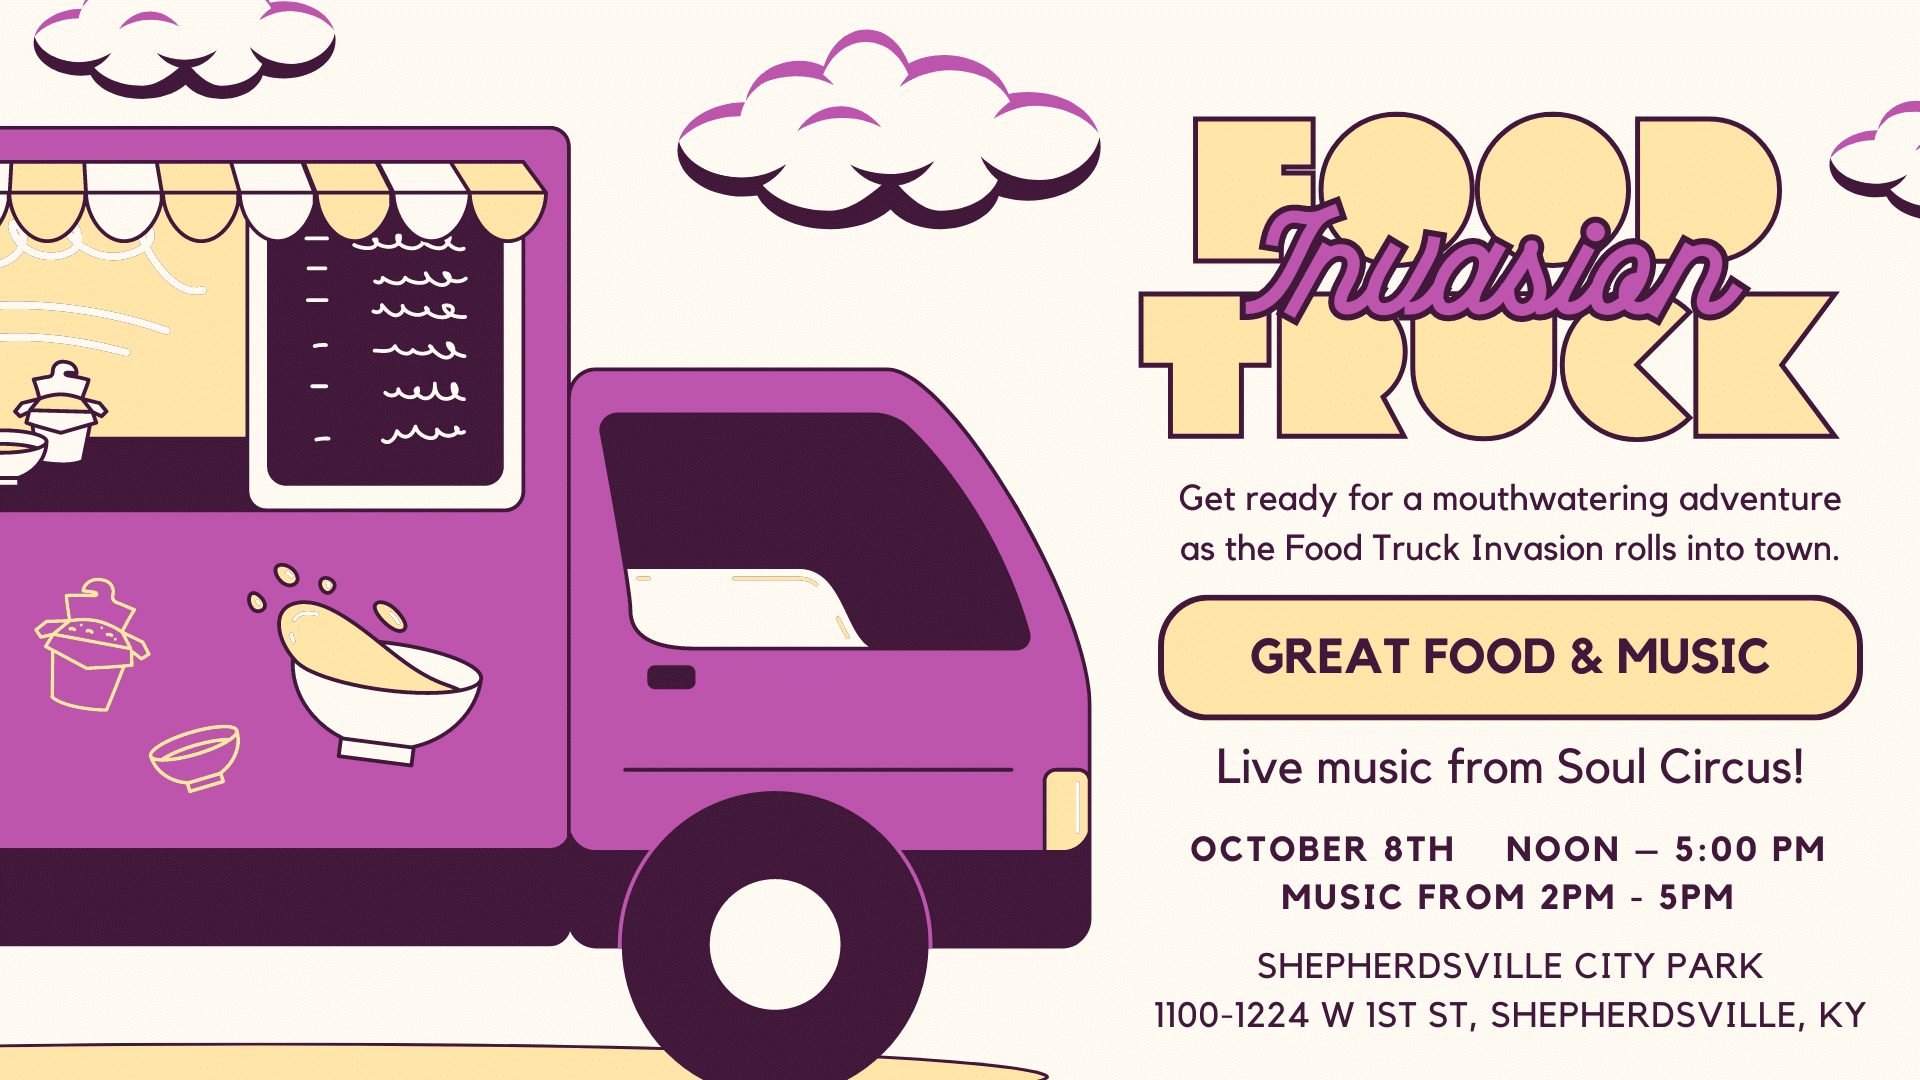 Graphic with information about upcoming Food Truck Invasion